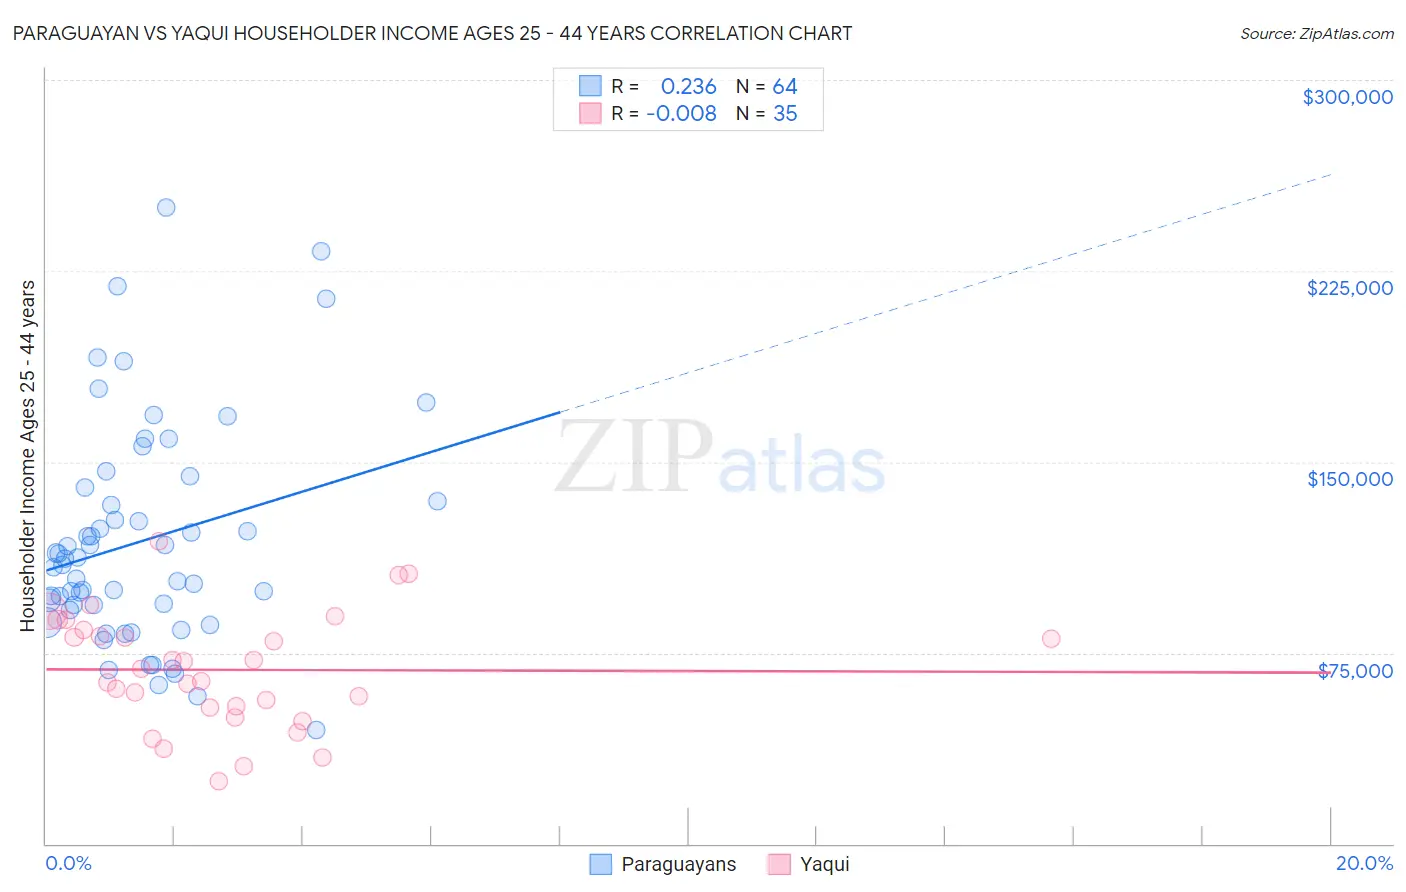 Paraguayan vs Yaqui Householder Income Ages 25 - 44 years